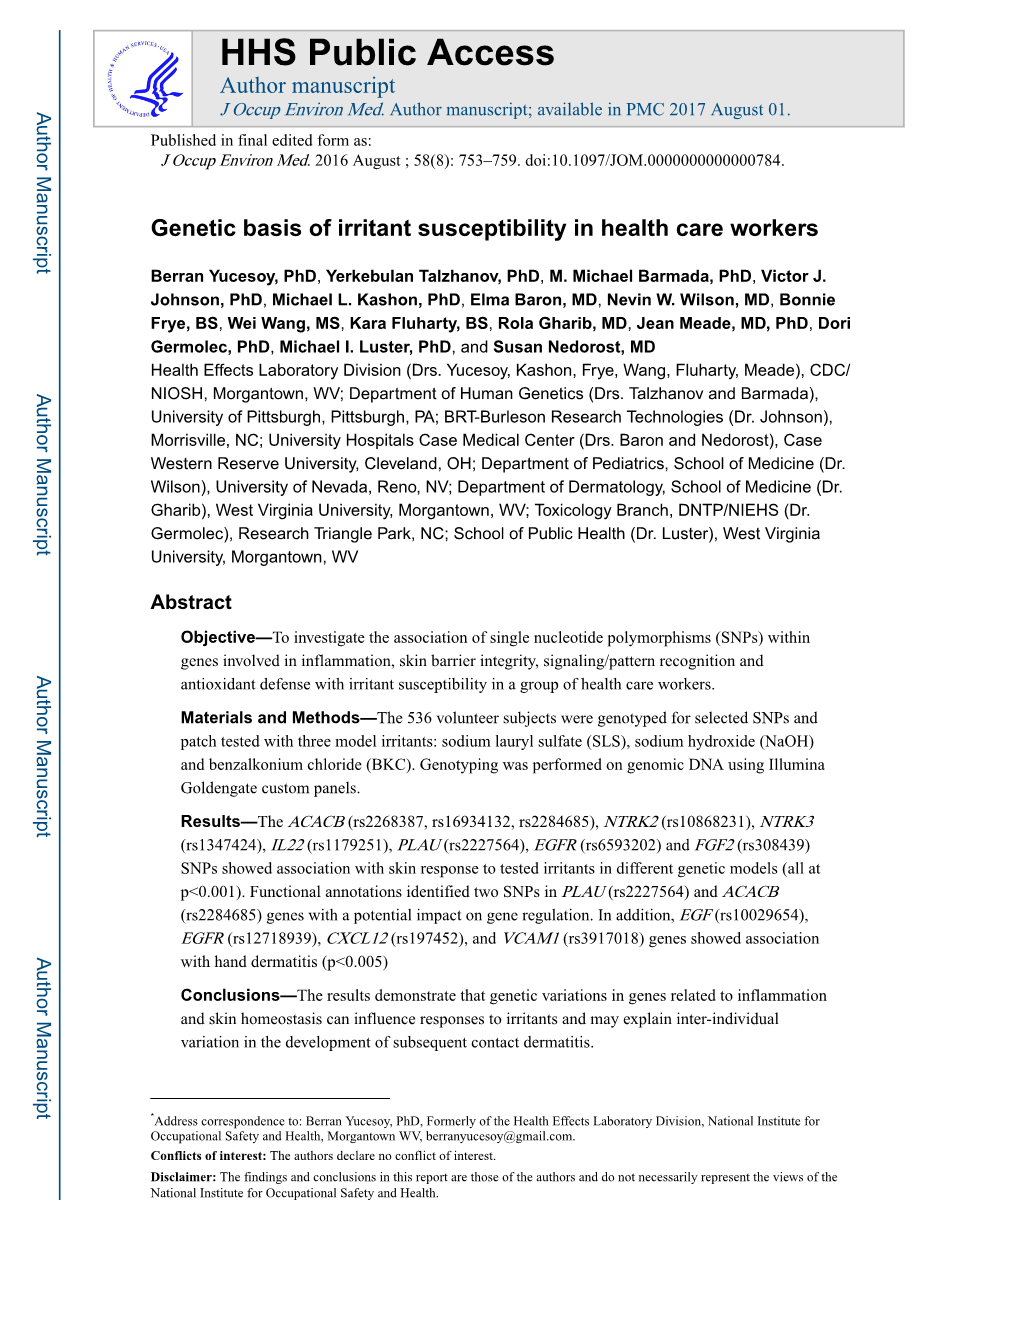 Genetic Basis of Irritant Susceptibility in Health Care Workers